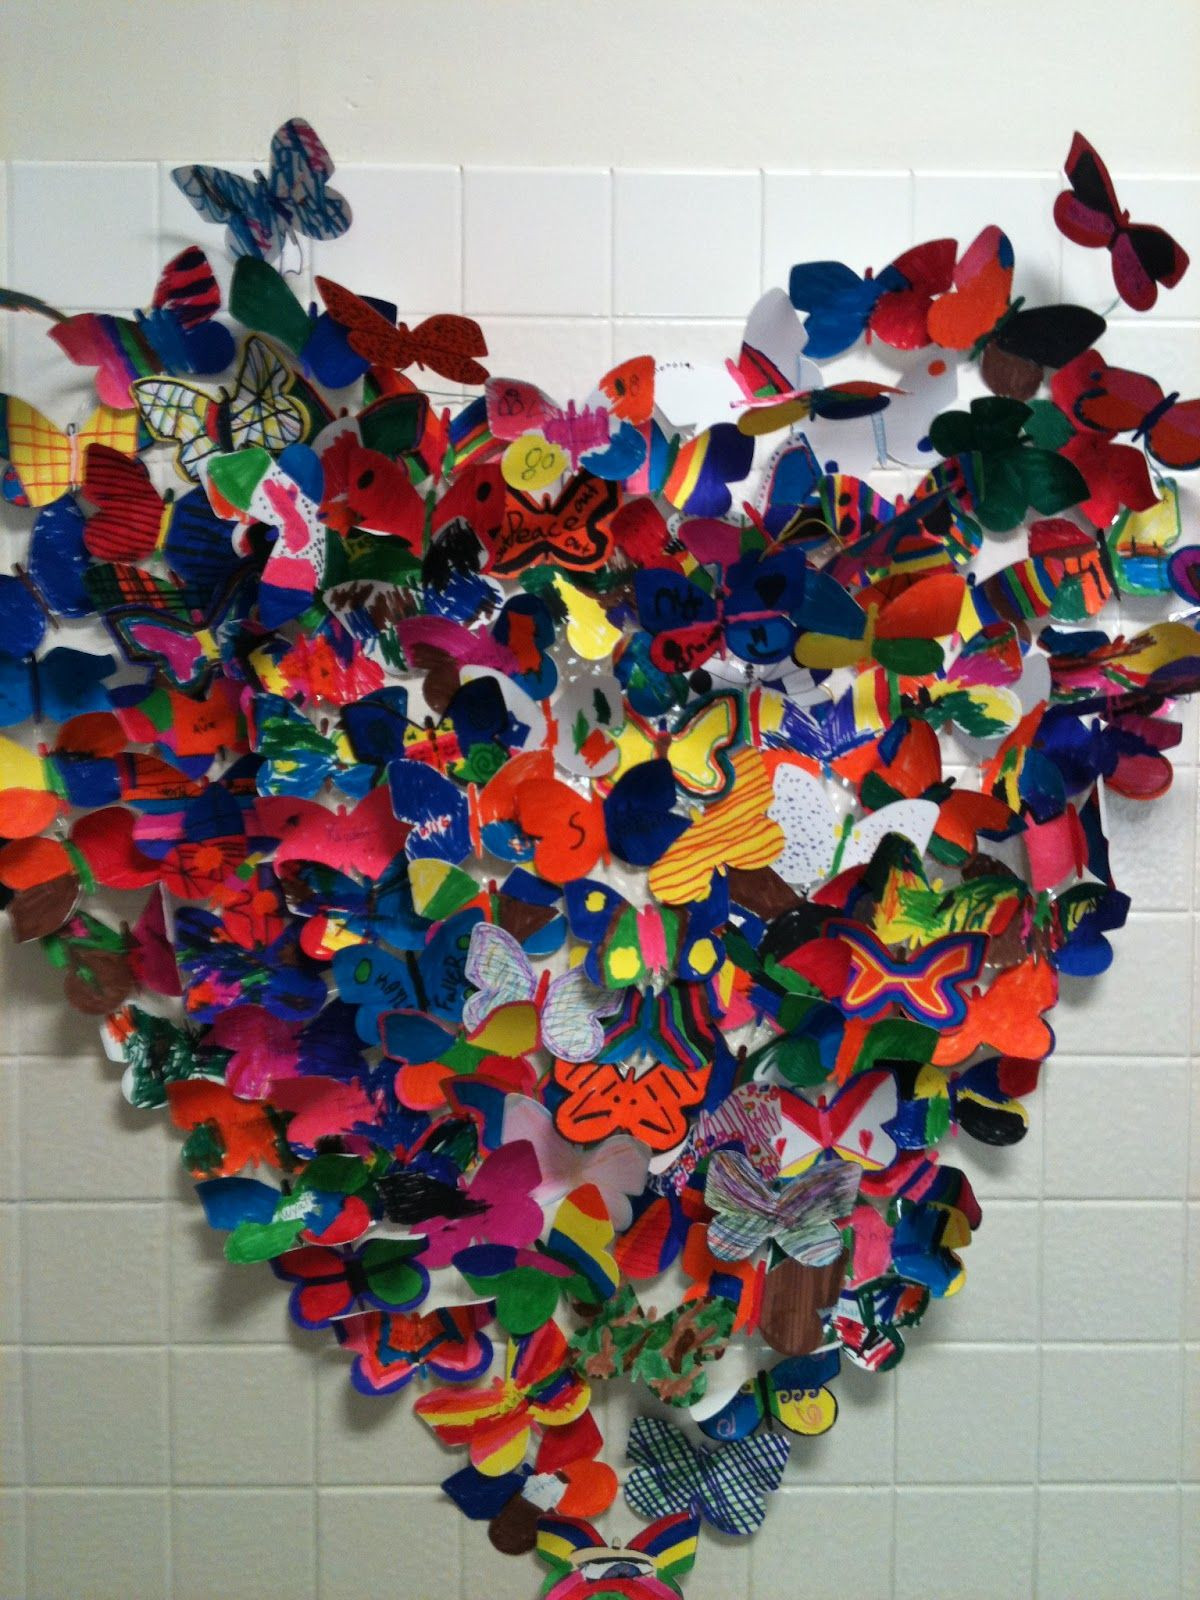 Group Art Project For Adults
 Collaborative Butterfly Heart I could see making this